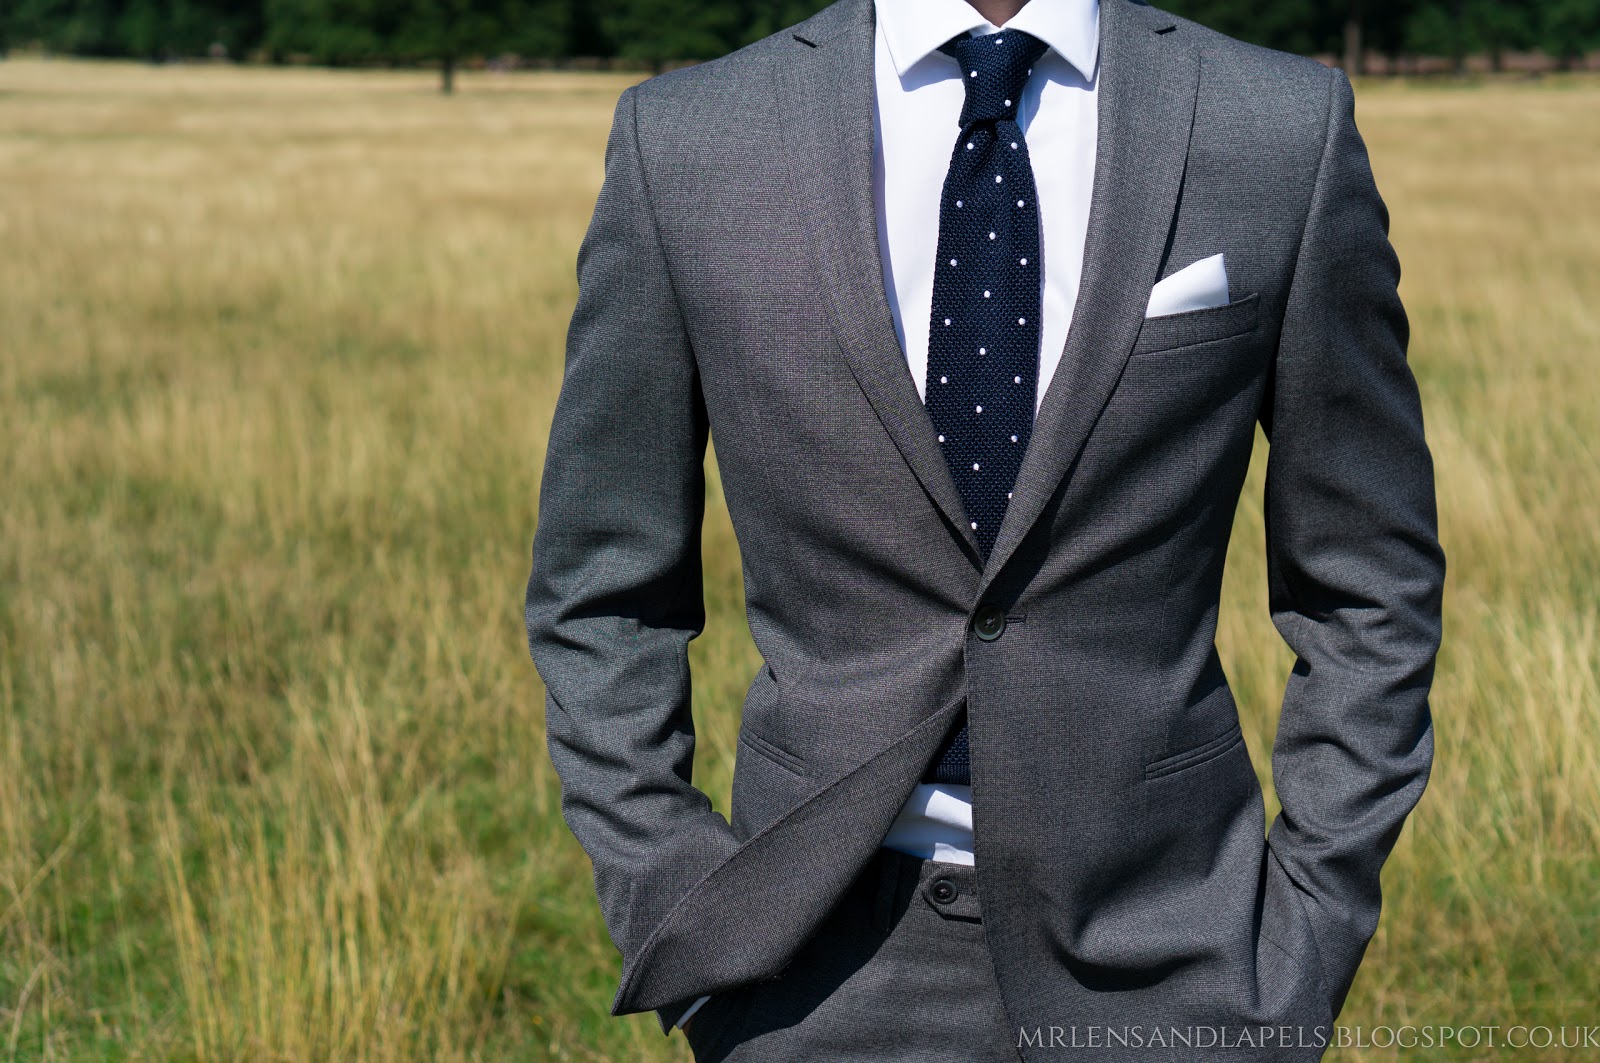 Mr Lens and Lapels: Suiting Up: Men's Formalwear by T.M. Lewin